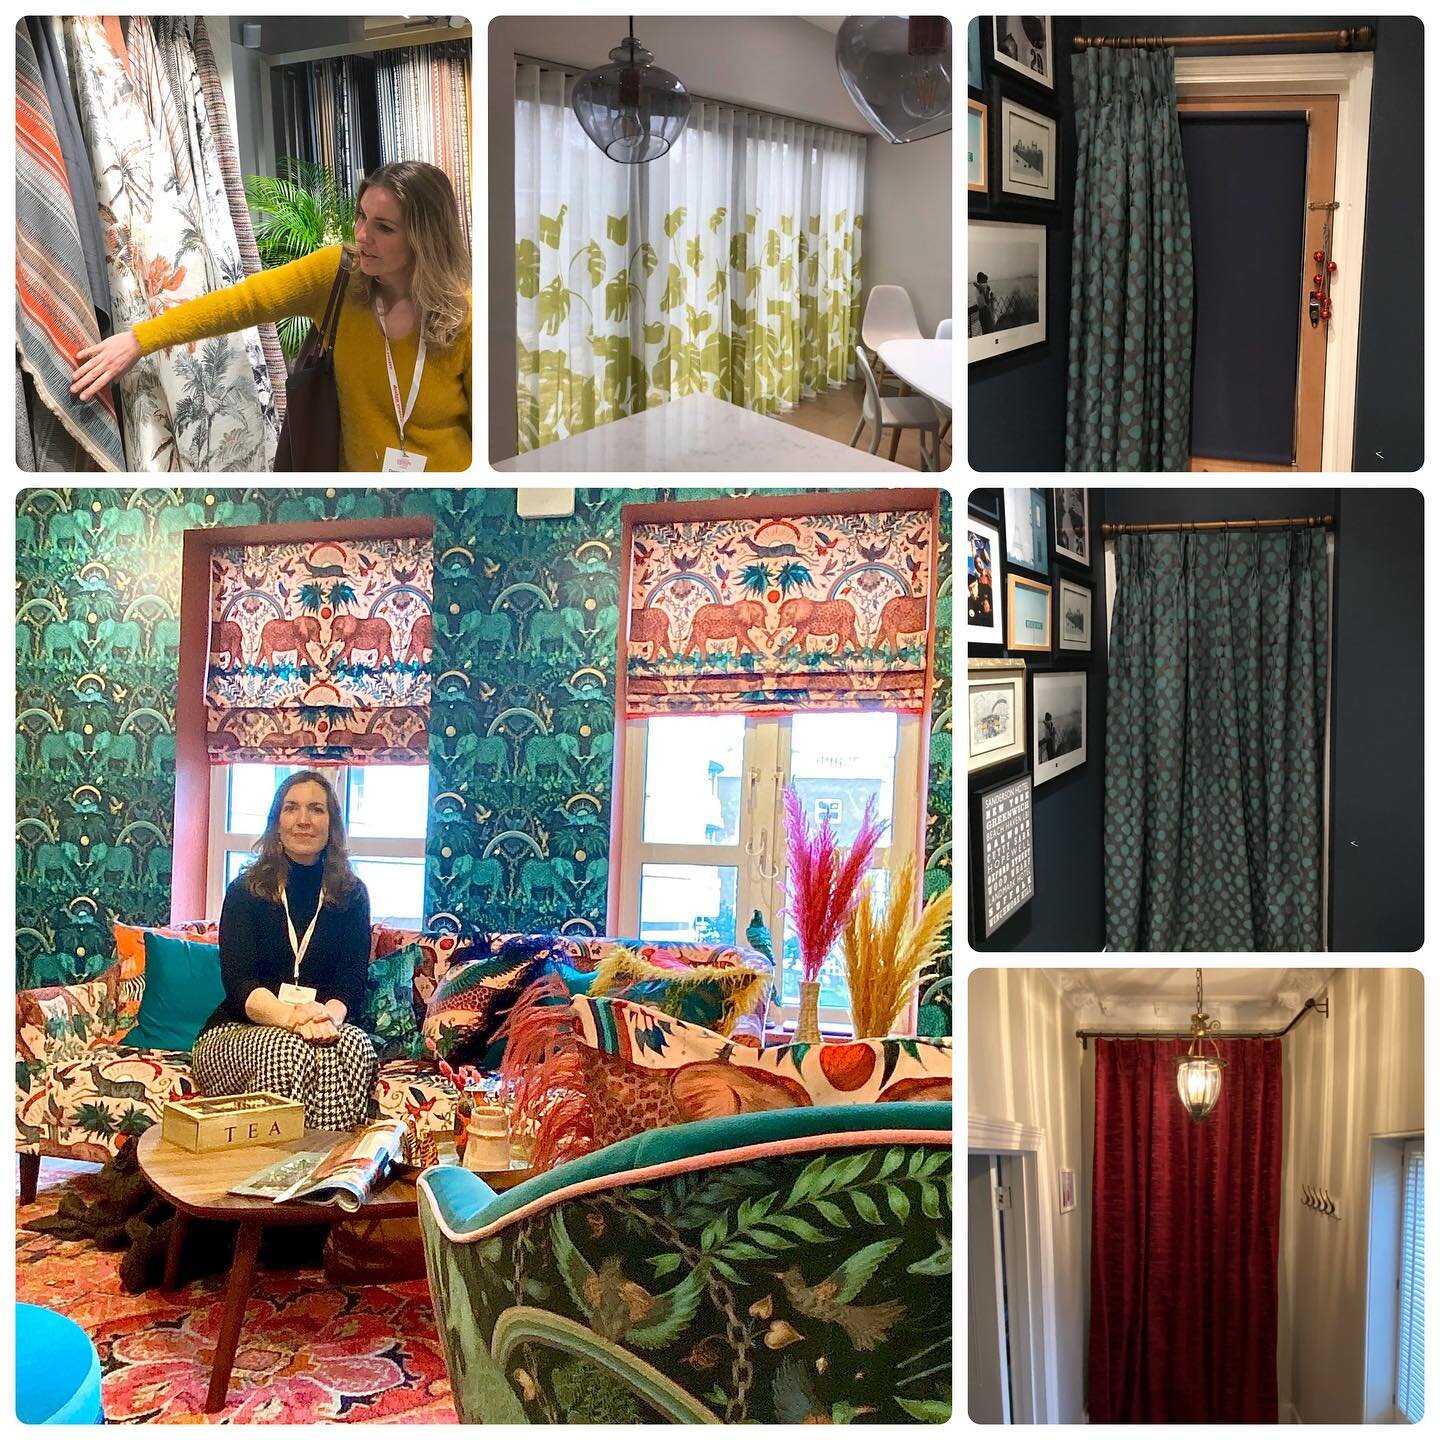 When choosing curtains or blinds it&rsquo;s important to get expert advice. Daniela has been helping clients to pick the right window dressings for over 17 years!
What sort of heading should they have? Pencil pleat? Box pleat? Pinch pleat?
How long s